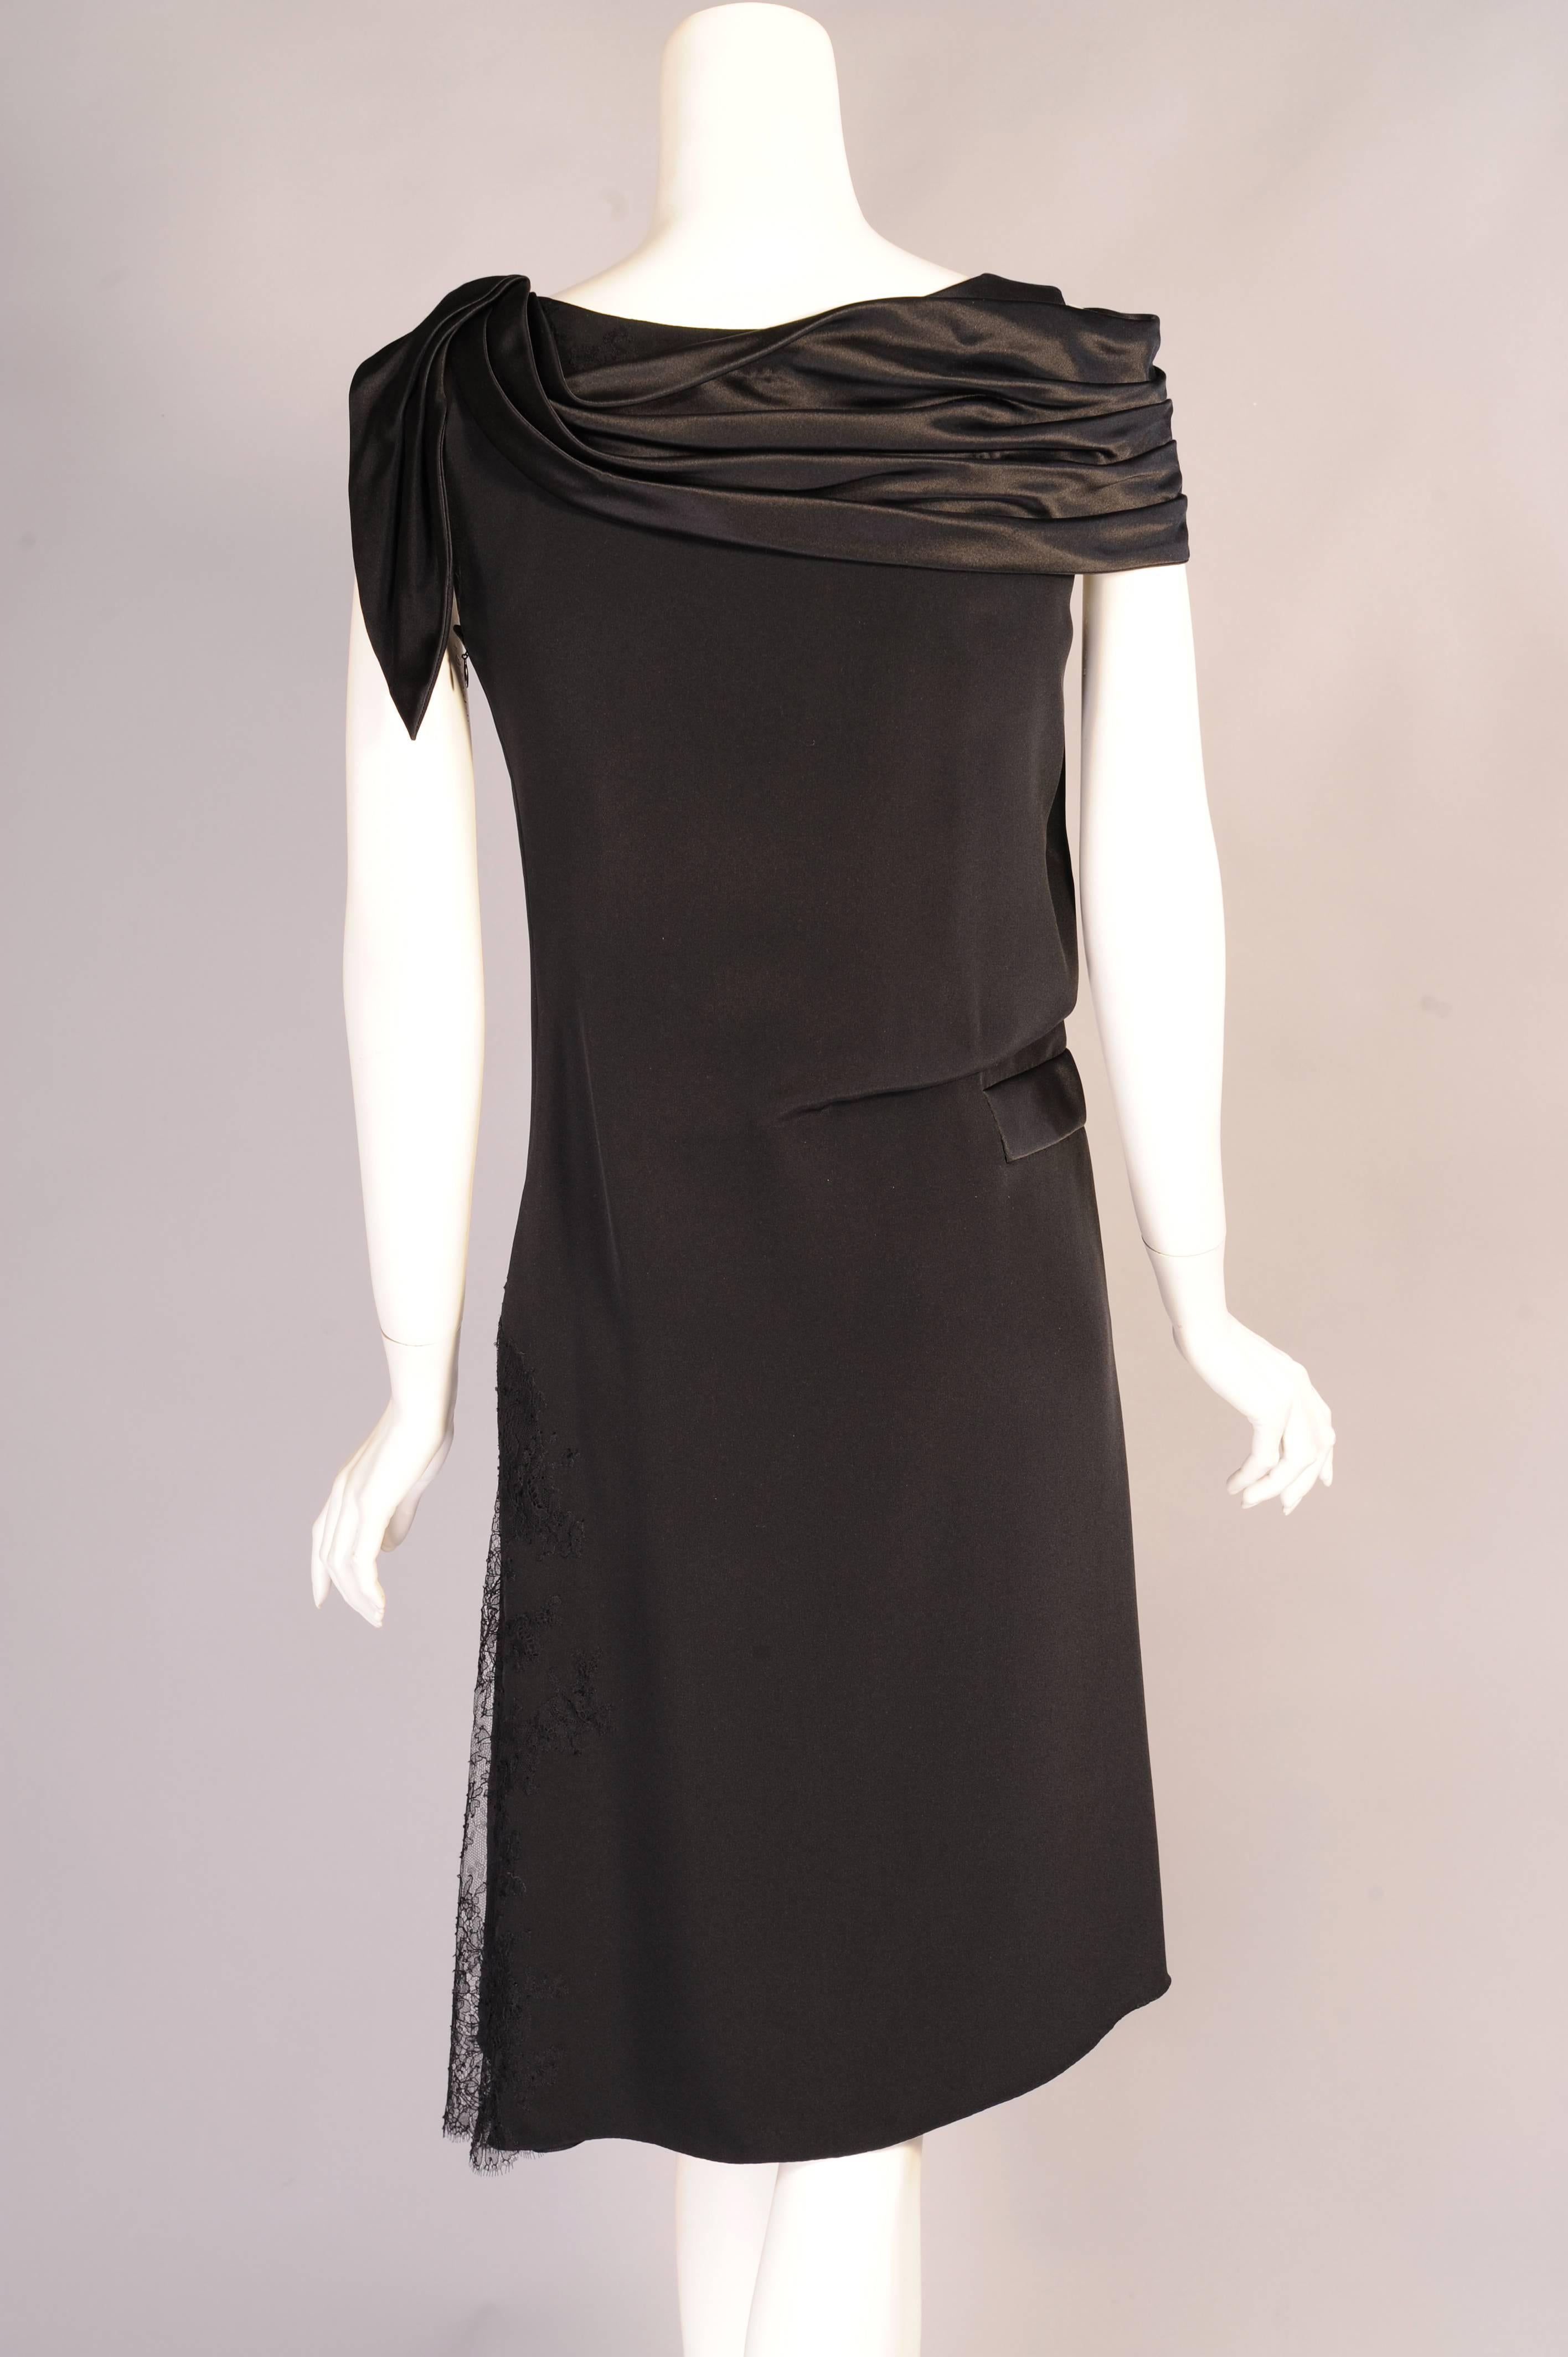 Women's Christian Lacroix Numbered Haute Couture Black Dress Optional Black Lace Sleeves For Sale